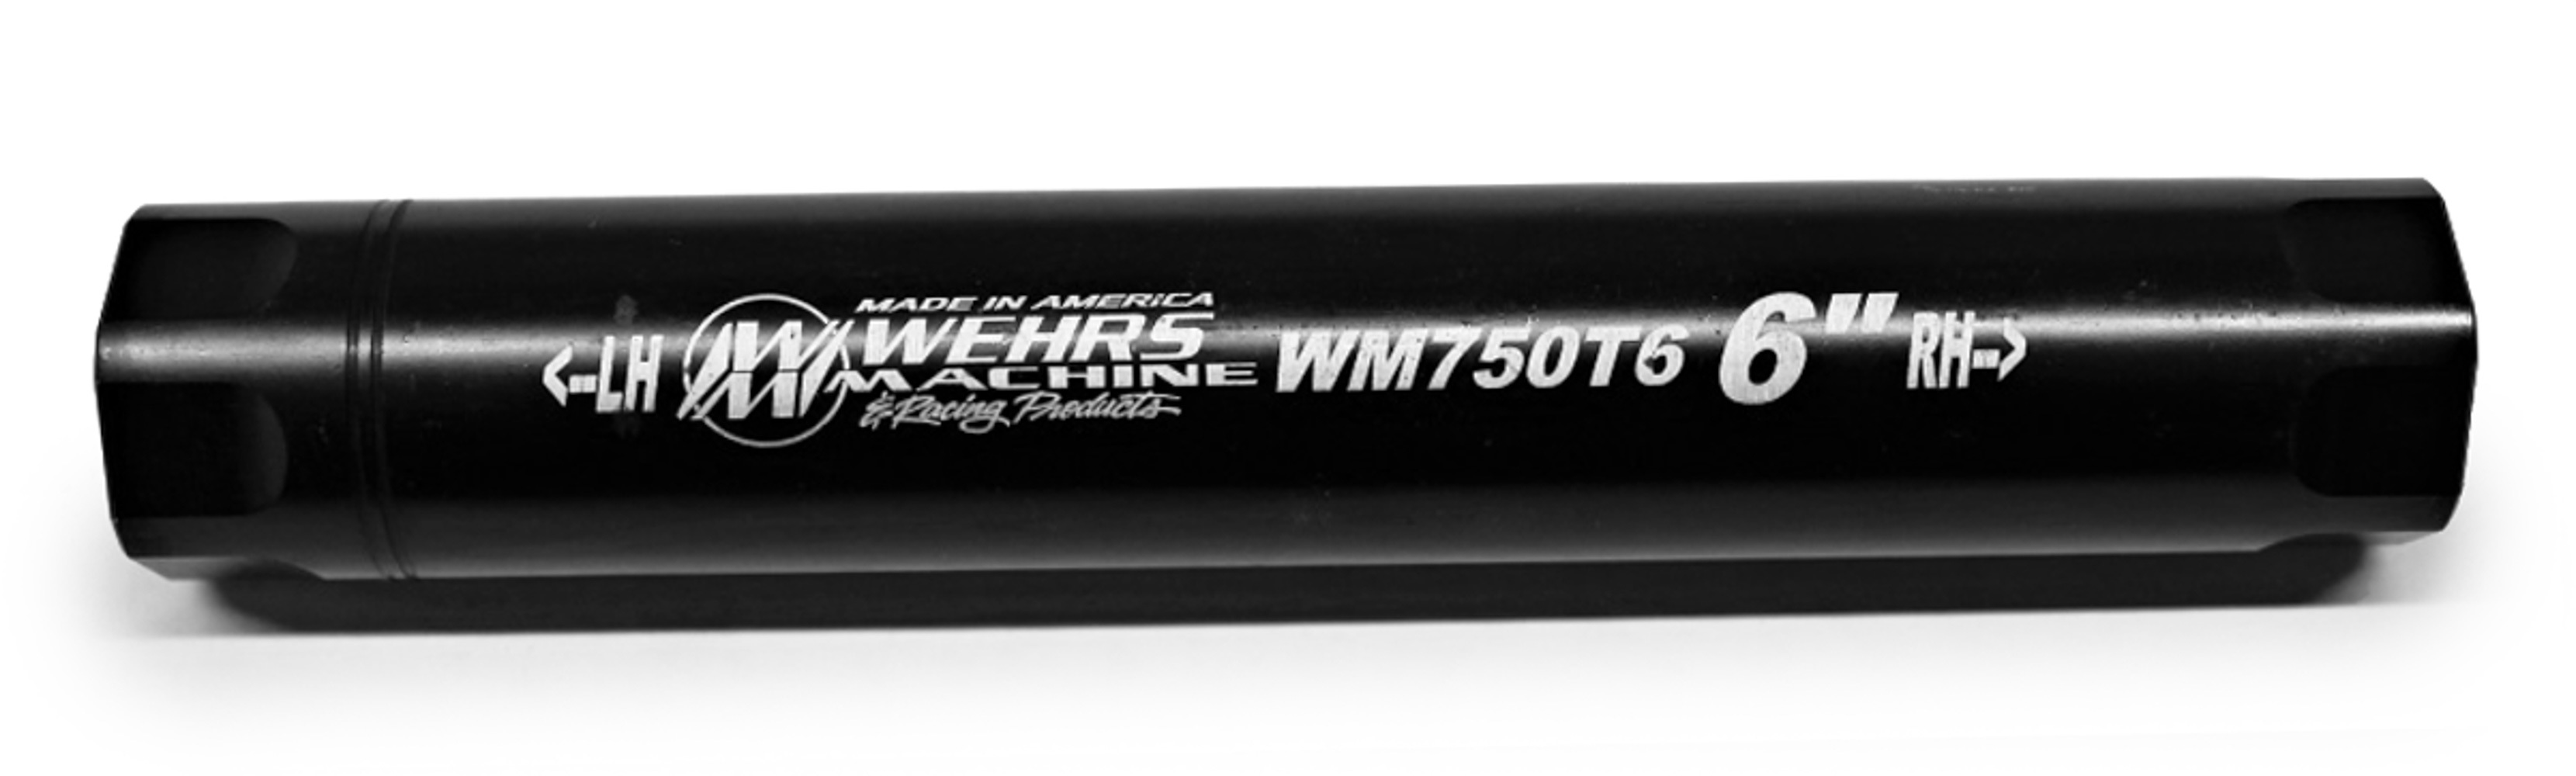 Suspension Tube 6in x 3/4in-20 THD